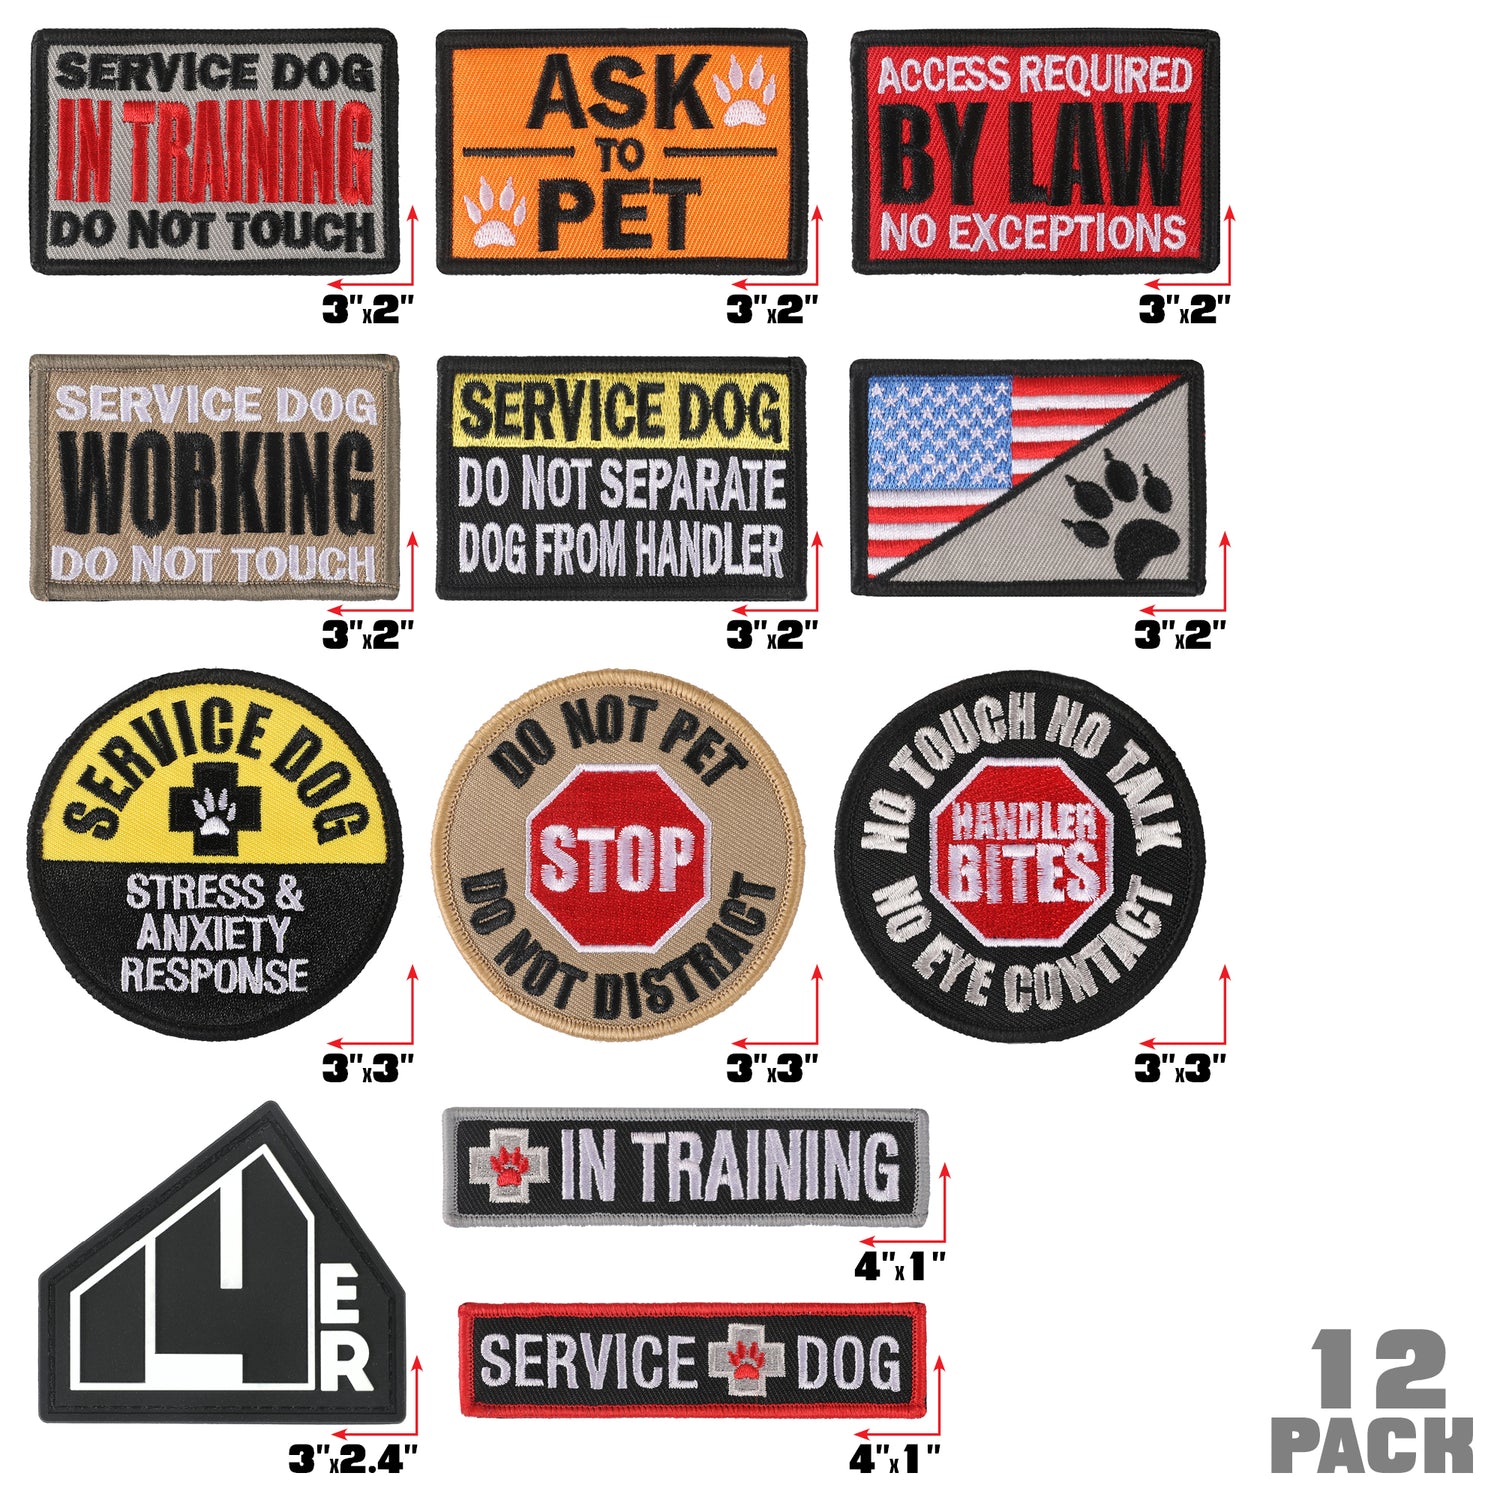 14er Tactical Service Dog Patches | Ask to Pet Patch, Do Not Pet Patch,  Service Dog in Training Patches | Service Dog Vest Patches, Dog Patches for